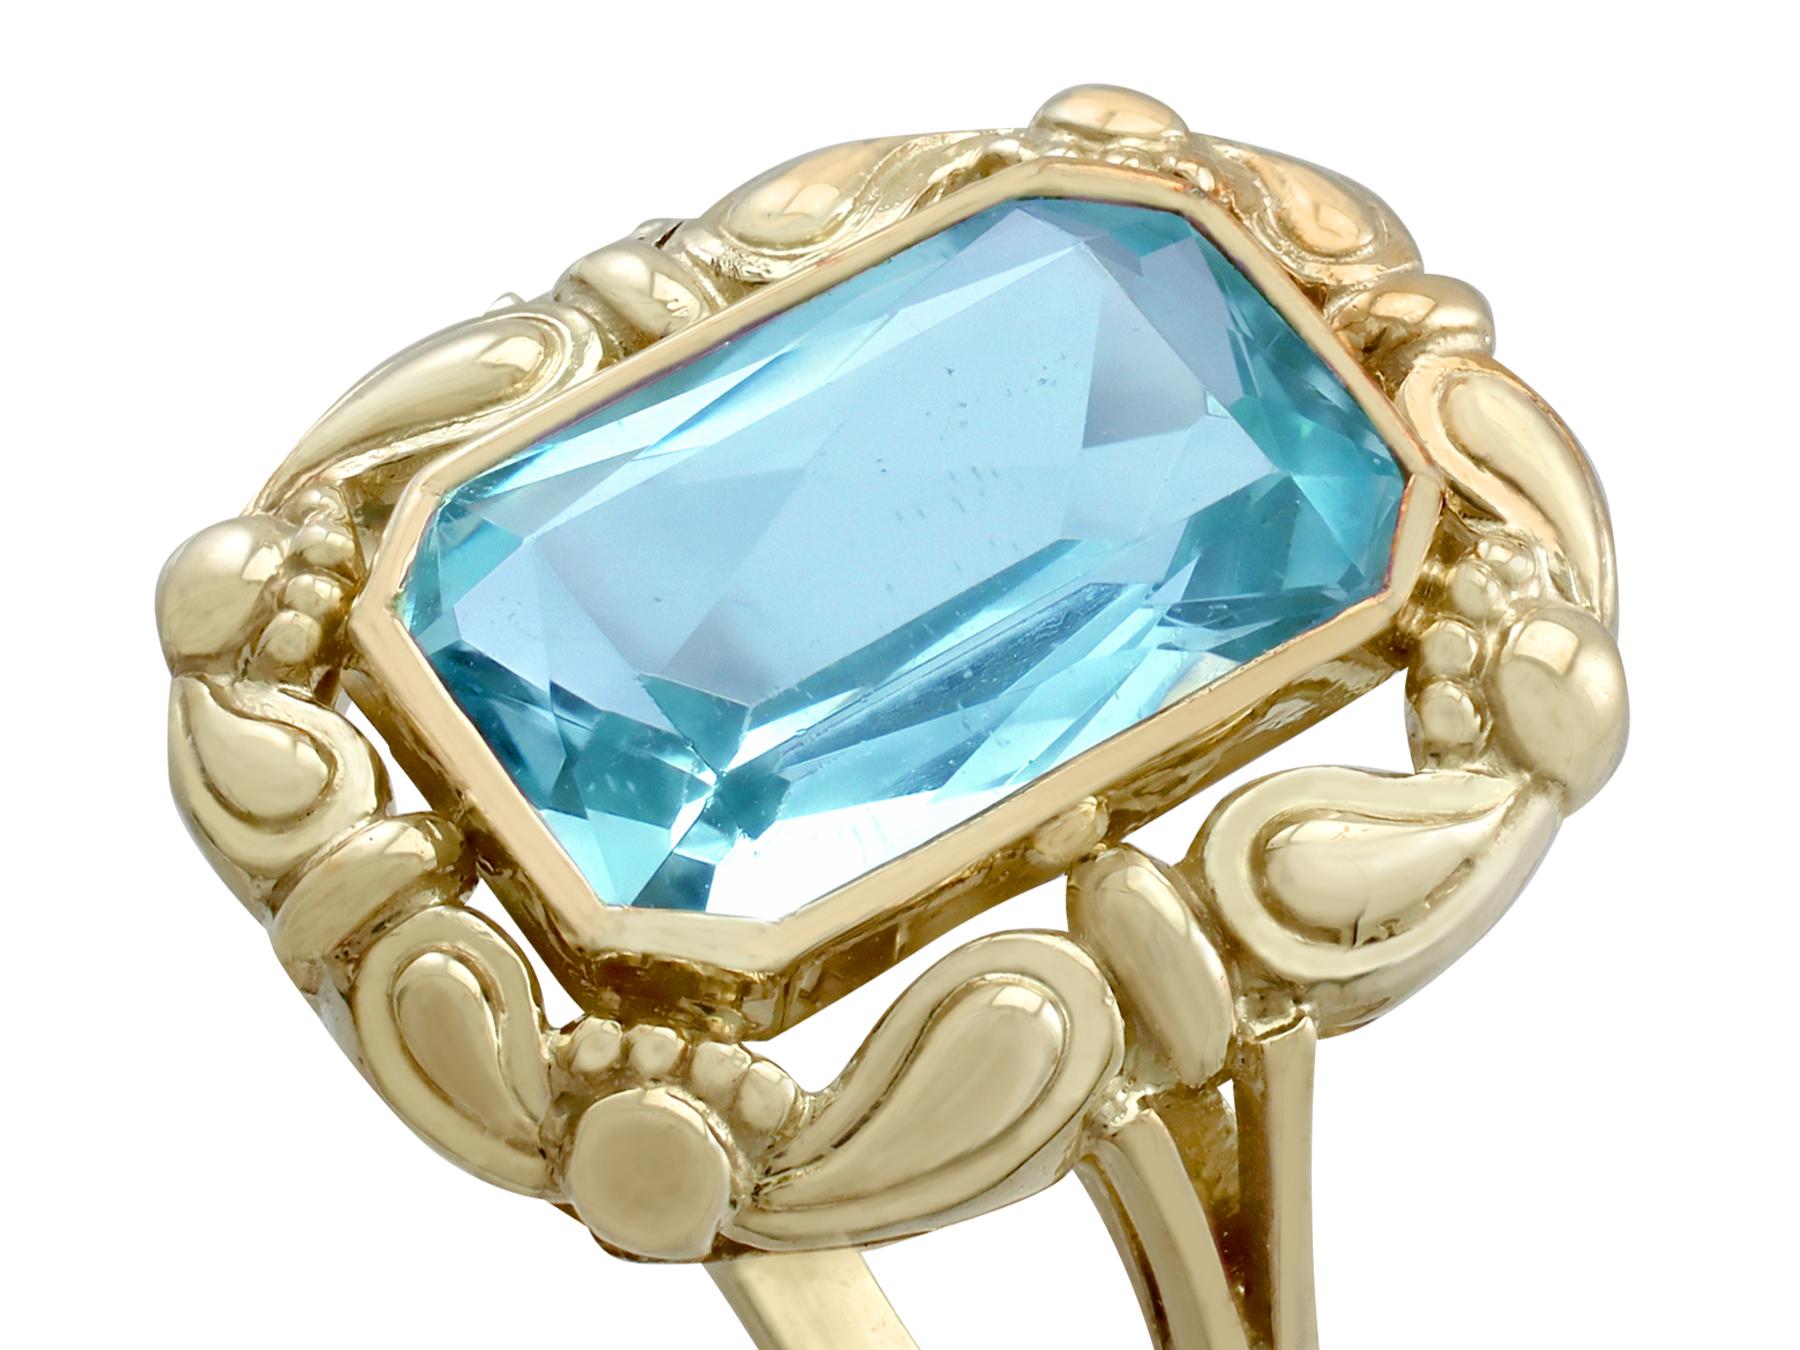 An impressive antique German 4.10 carat aquamarine, 8 karat yellow gold dress ring; part of our diverse antique jewelry and estate jewelry collections.

This stunning, fine and impressive antique gold aquamarine ring has been crafted in 8k yellow